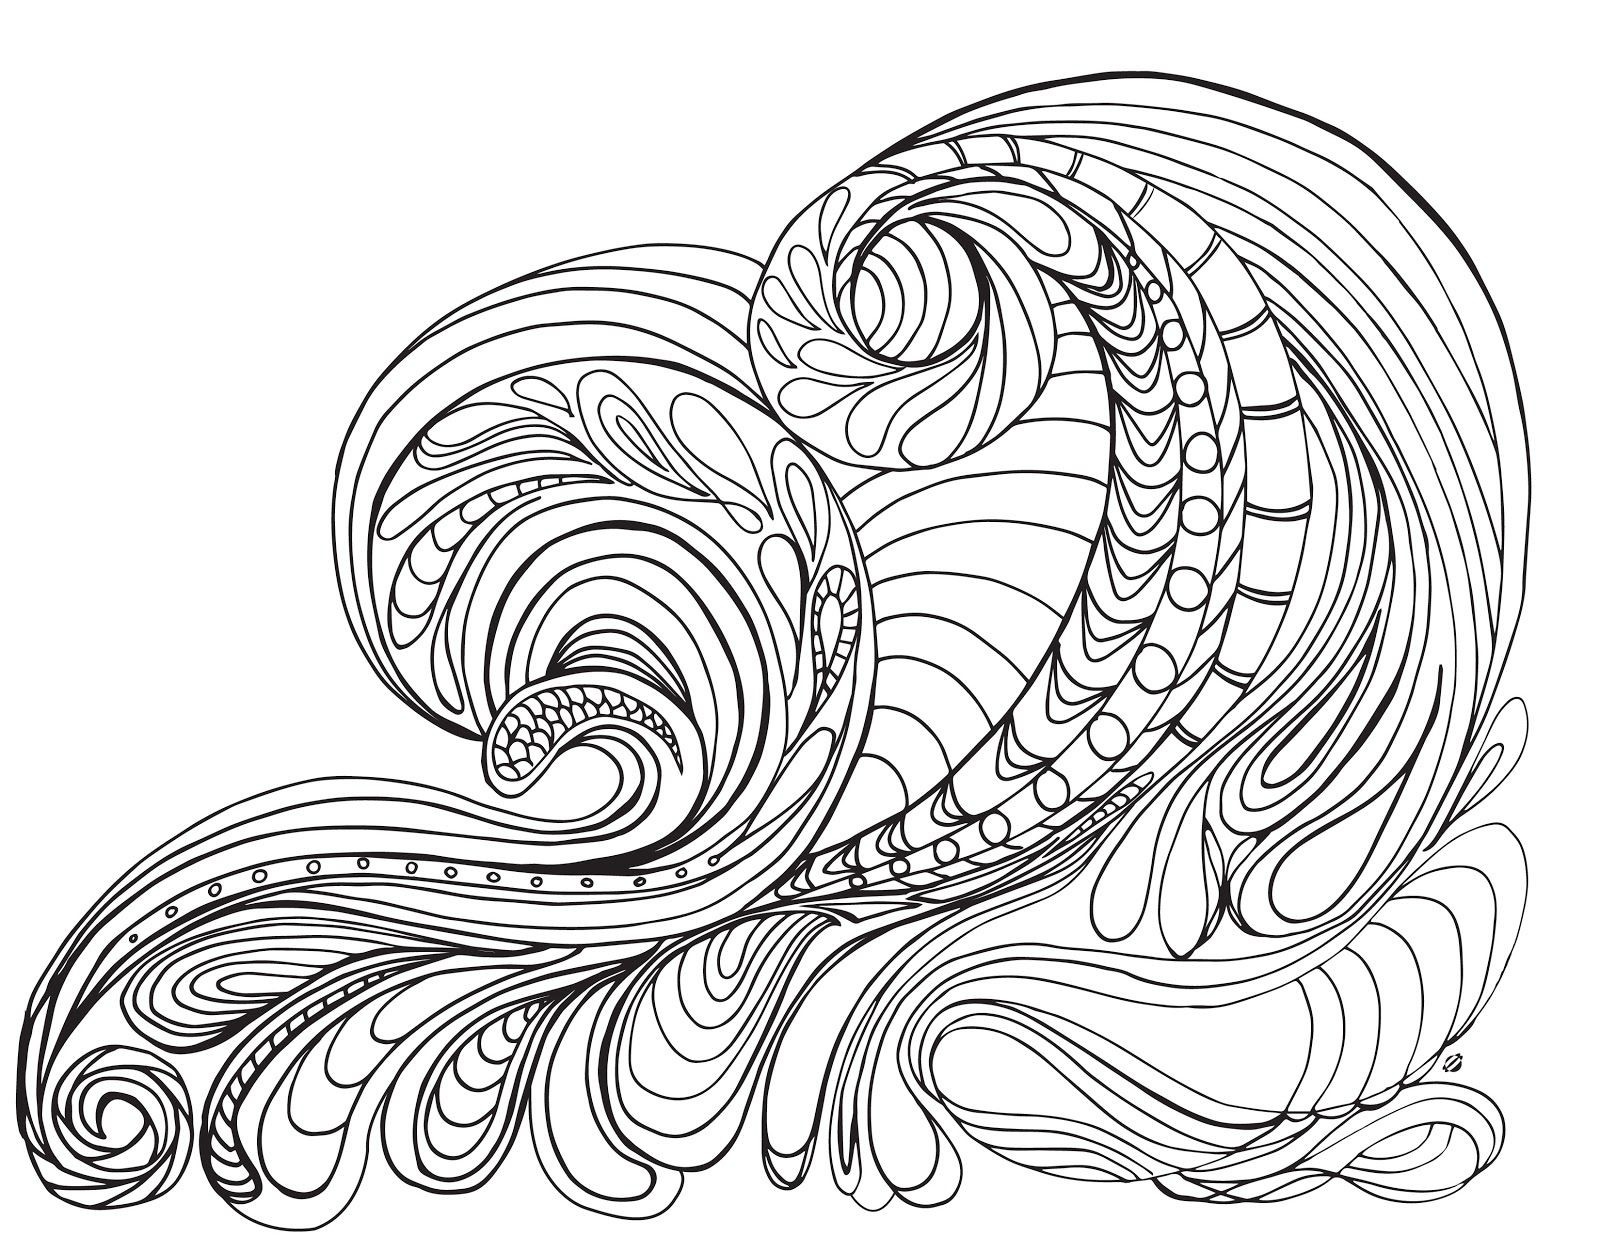 Ocean Waves Coloring Pages For Adults
 Ocean Waves Coloring Pages AZ Coloring Pages